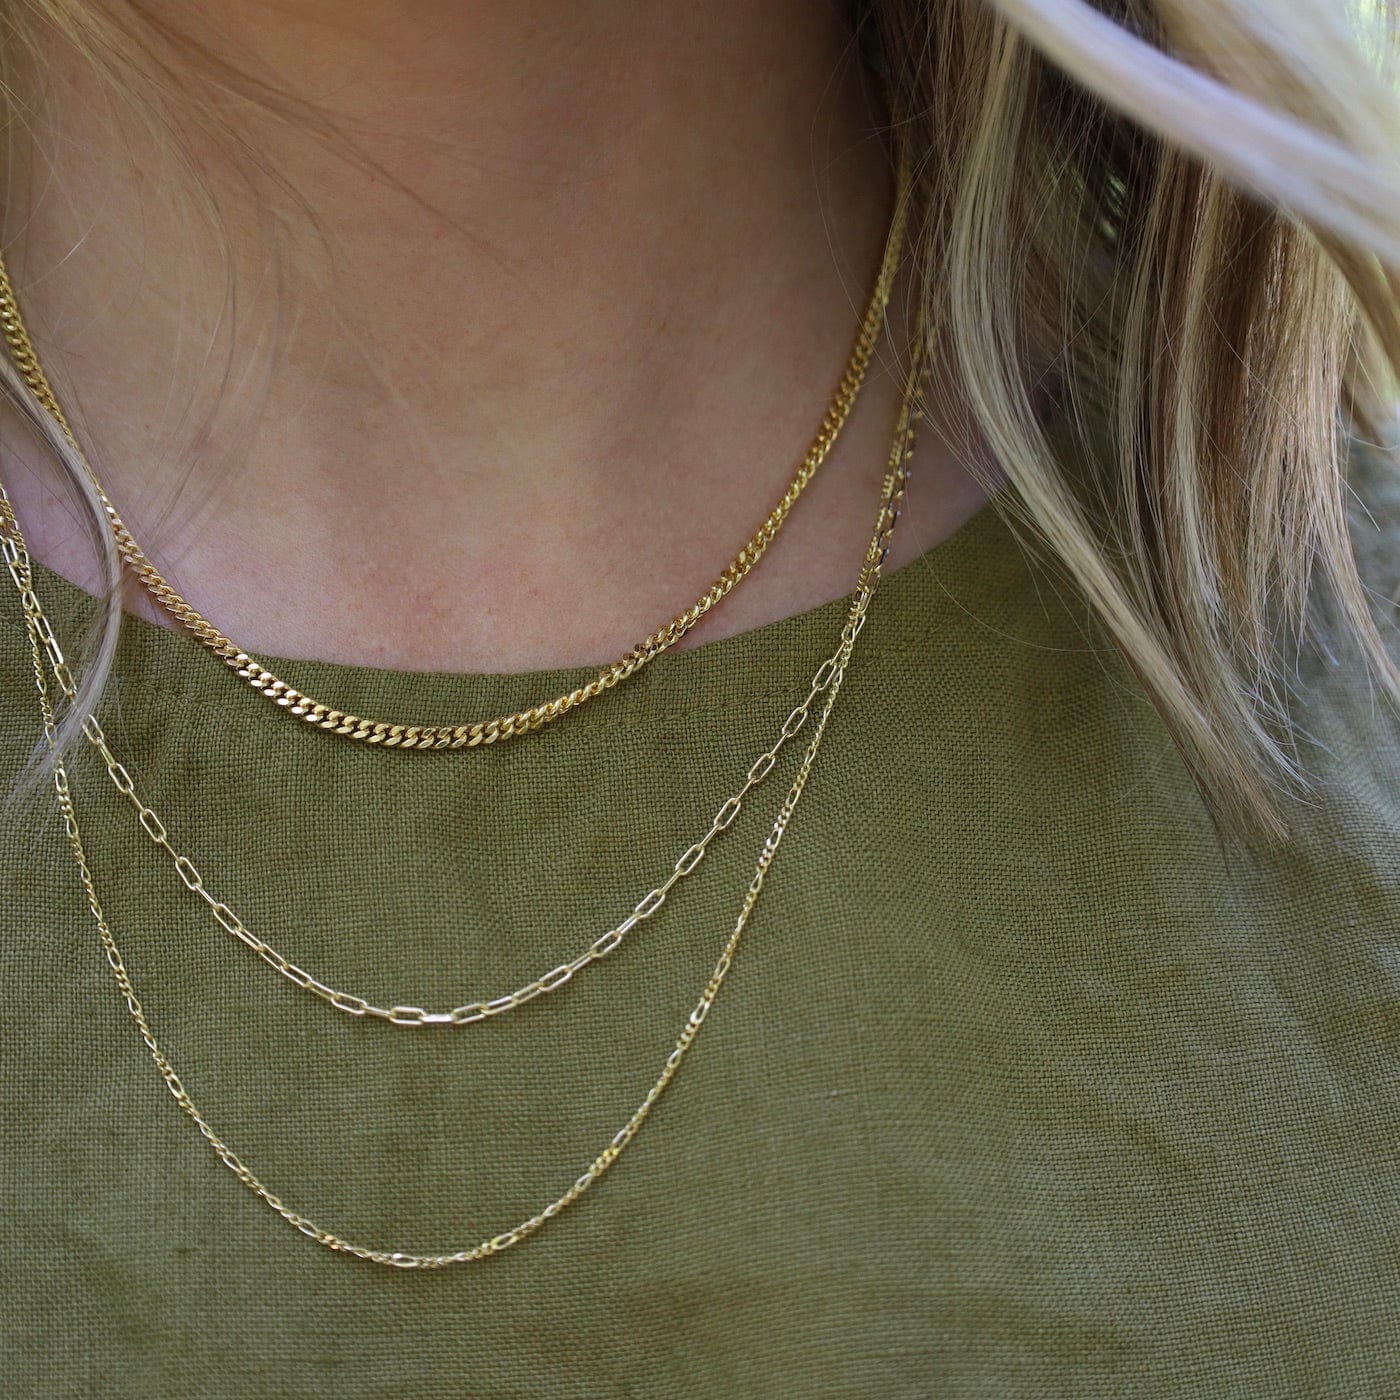 Elisa 18k Gold Vermeil Curb Chain Necklace in Red Tiger's Eye | Kendra Scott